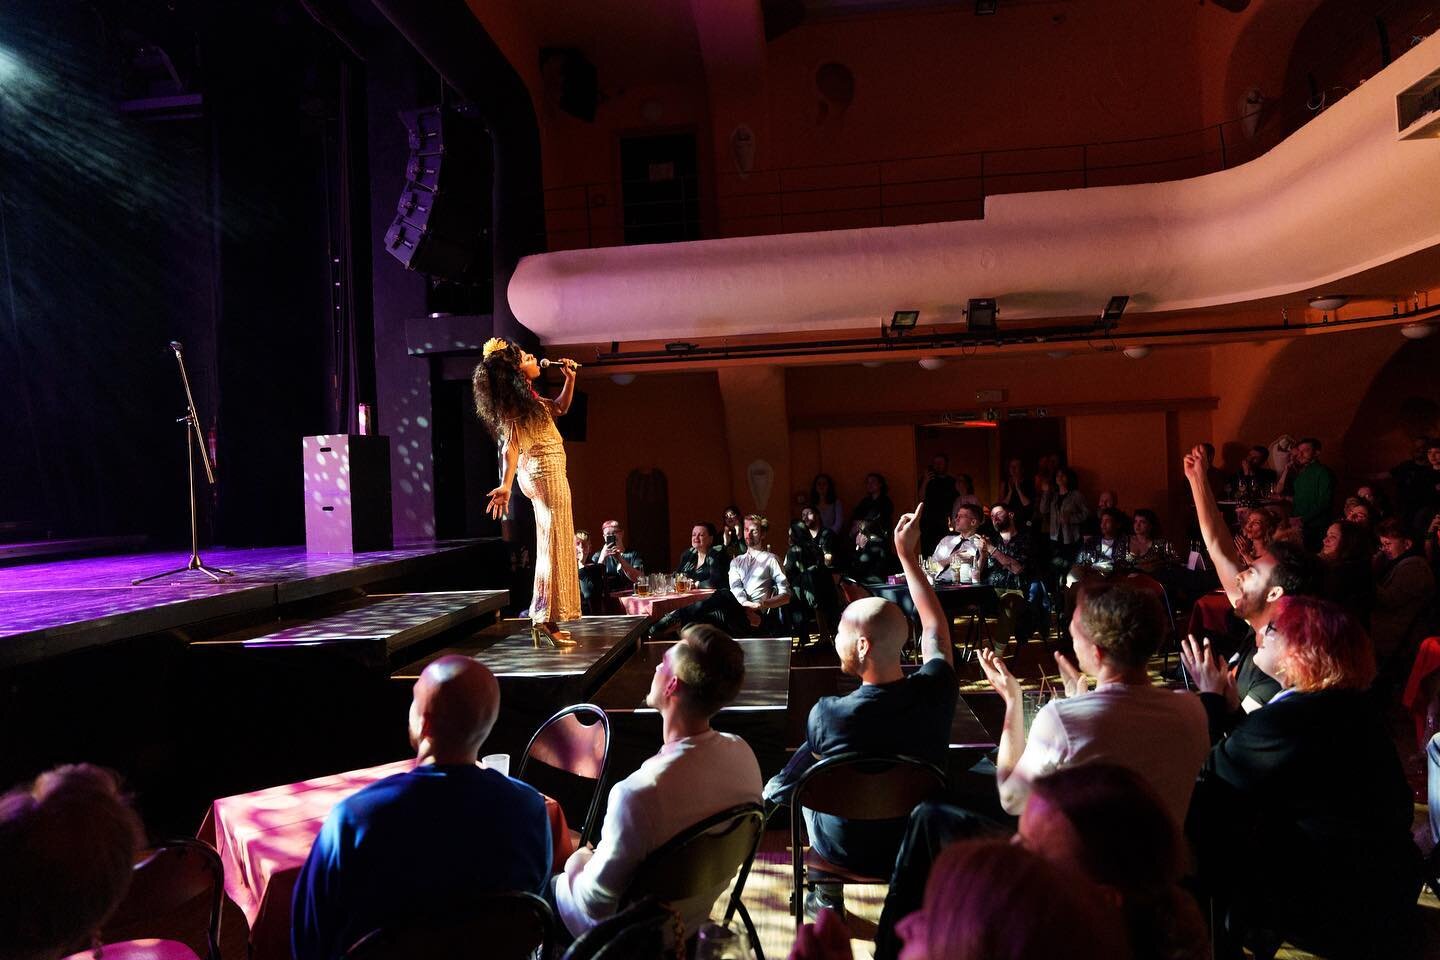 Performing Skyfall at @pinkbusplatform Gay Oscars. With this performance I also projected videos from Jon Stewart roasting Oklahoma State Senator Nathan Dahm and featuring some of the amazing work from @extragramsatx and @dragstoryhour. Shout out to 